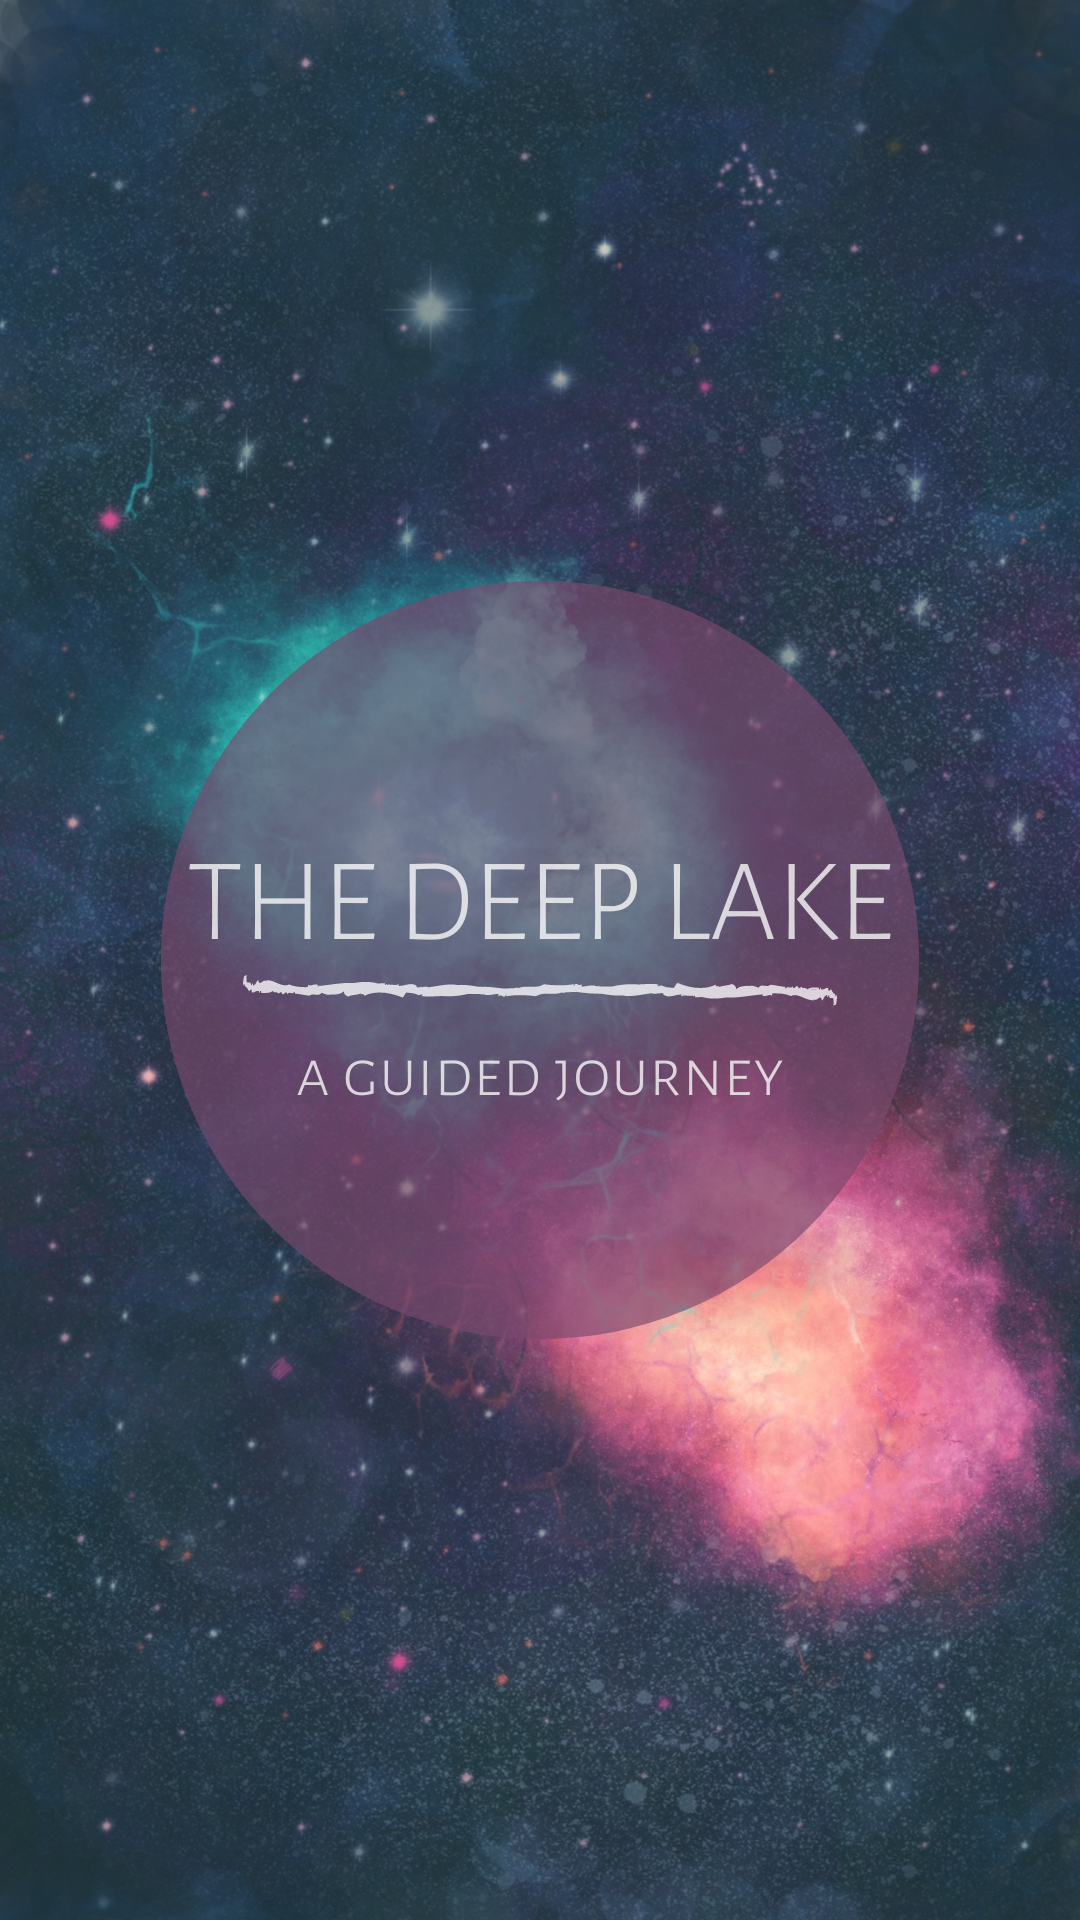 The Deep Lake - A Guided Journey